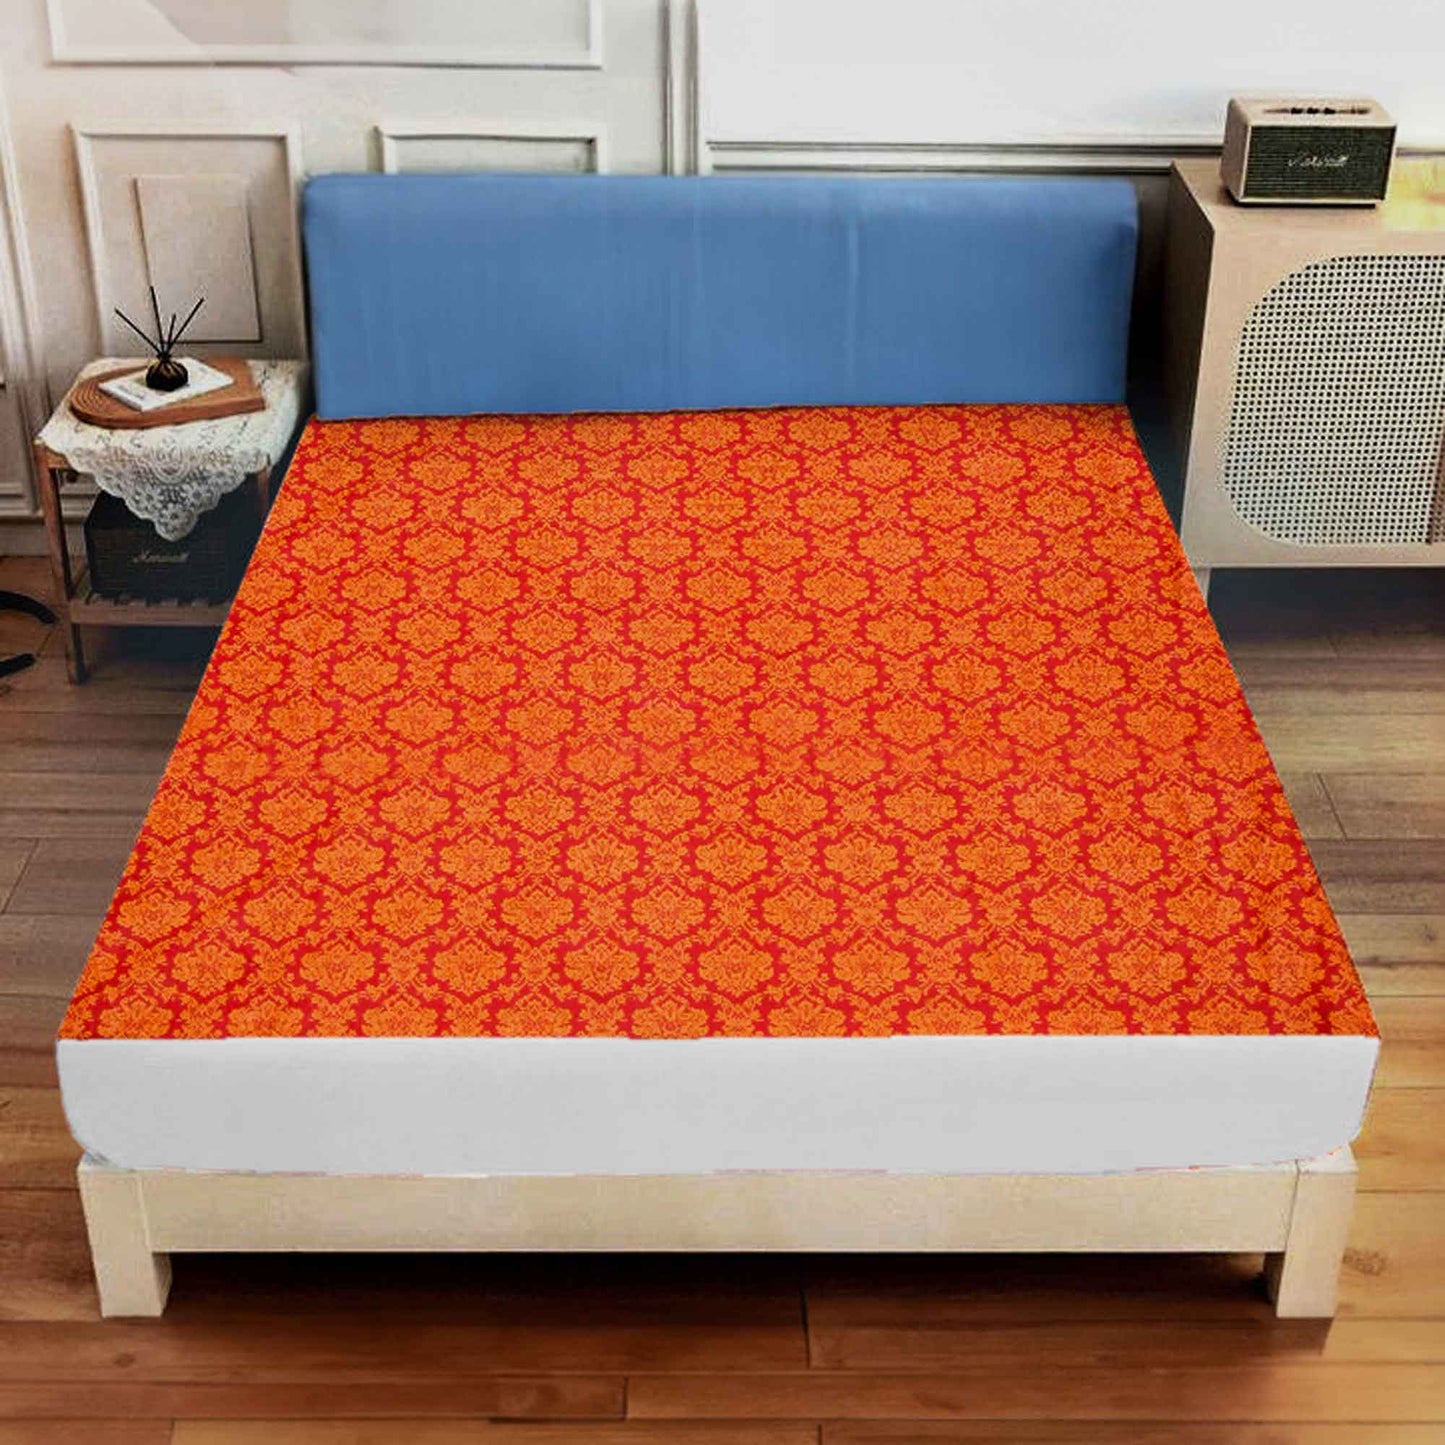 Multi Style Printed Water Proof Mattress Protector Cover Mattress Protector BKF D1 